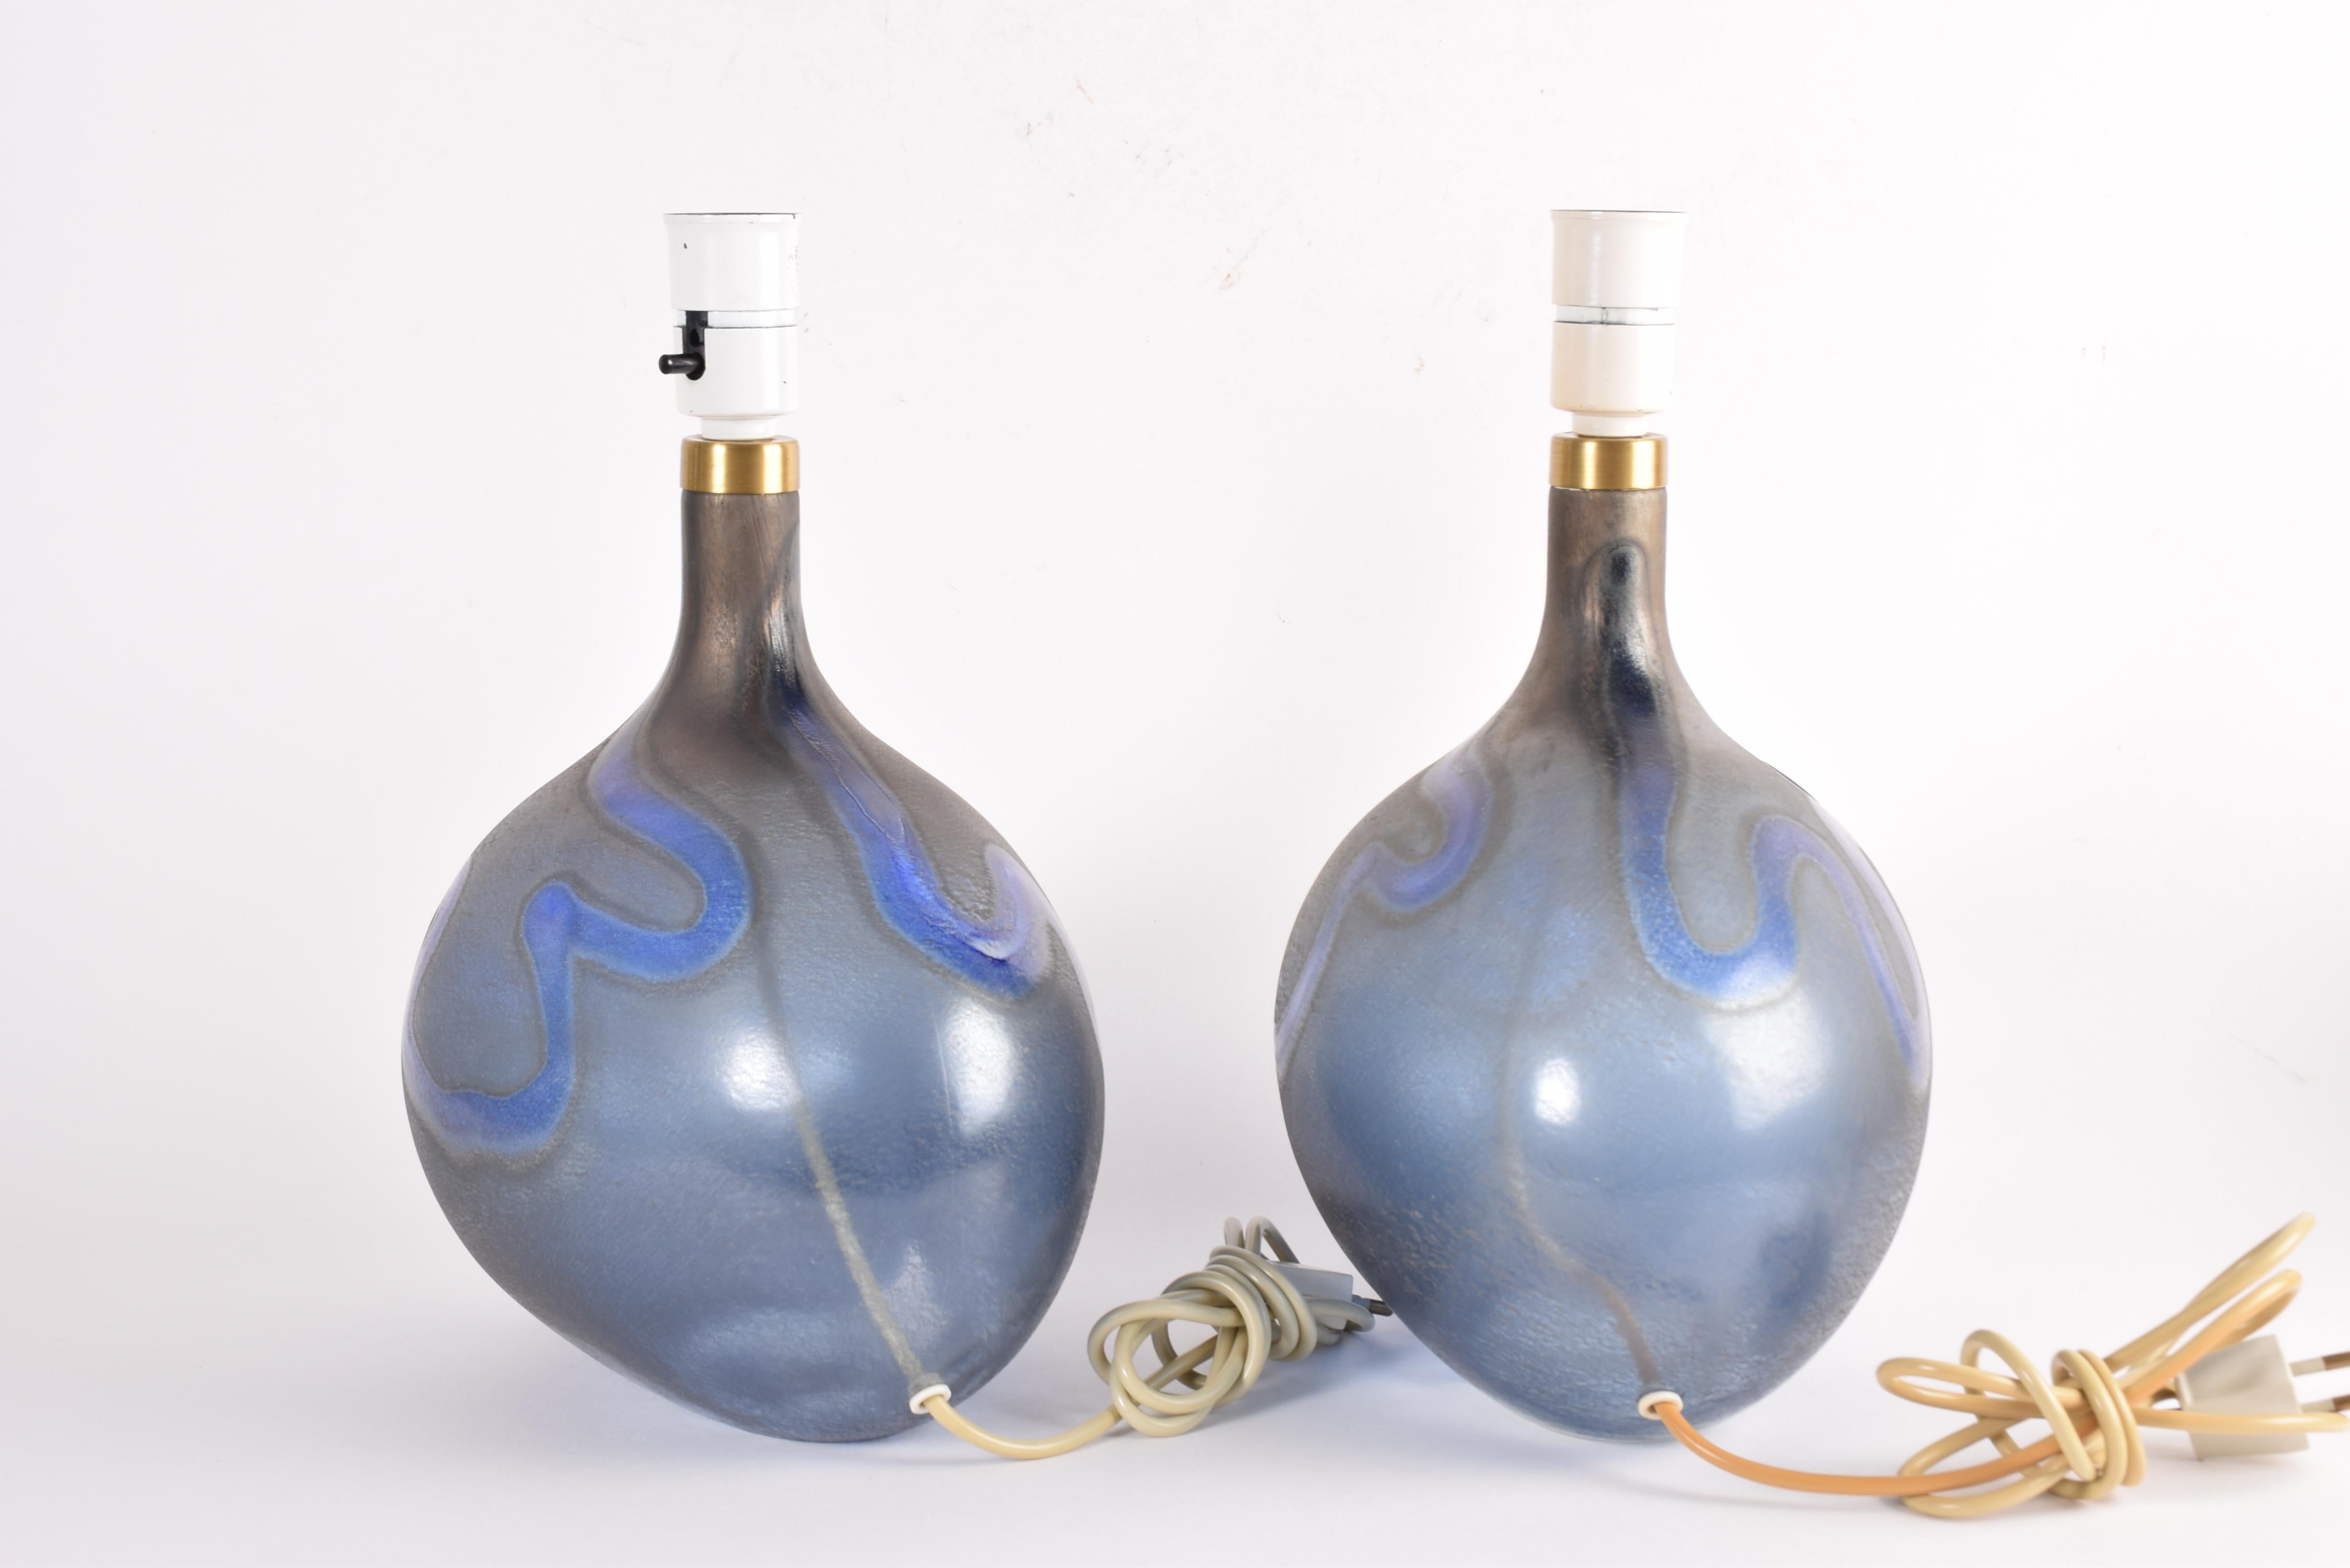 Pair of Large Holmegaard Lamp Art Blue Sculptural Glass Table Lamps Danish 1970s For Sale 1